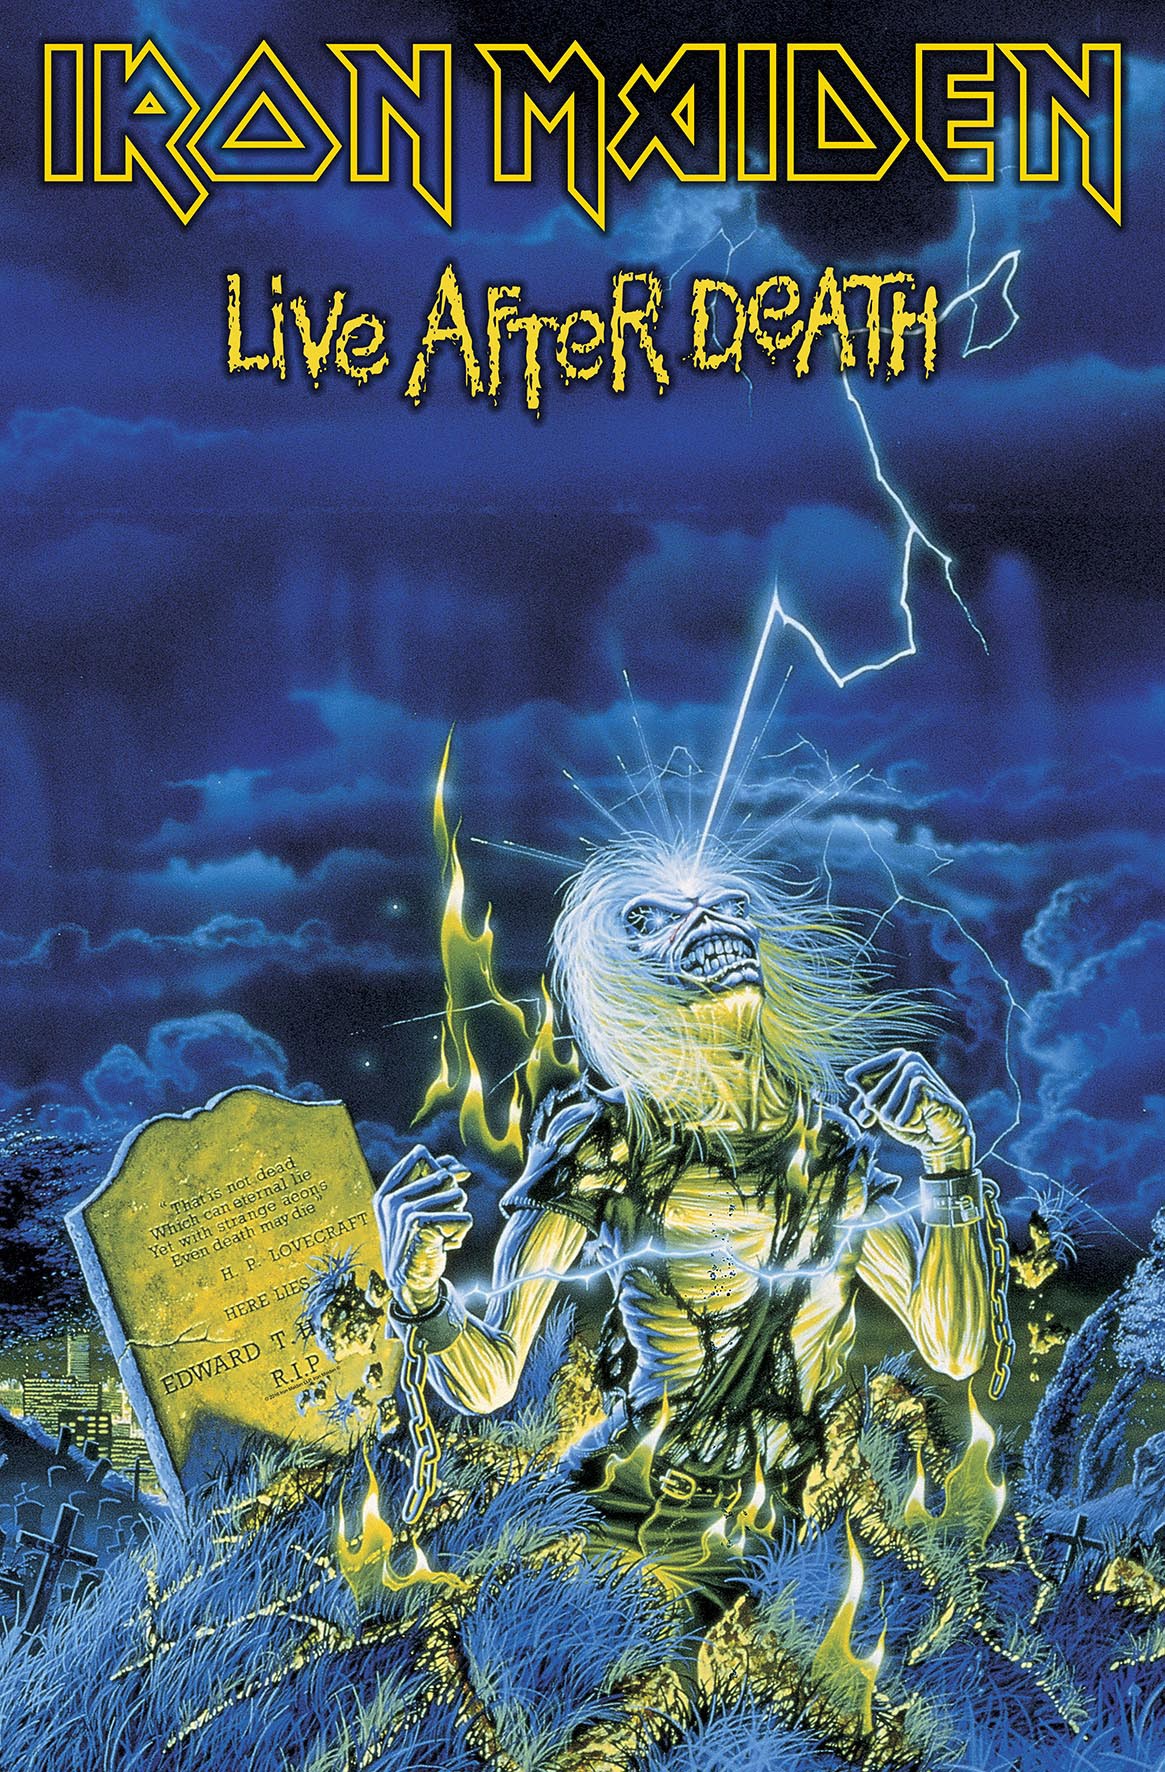 Iron Maiden - Life After Death